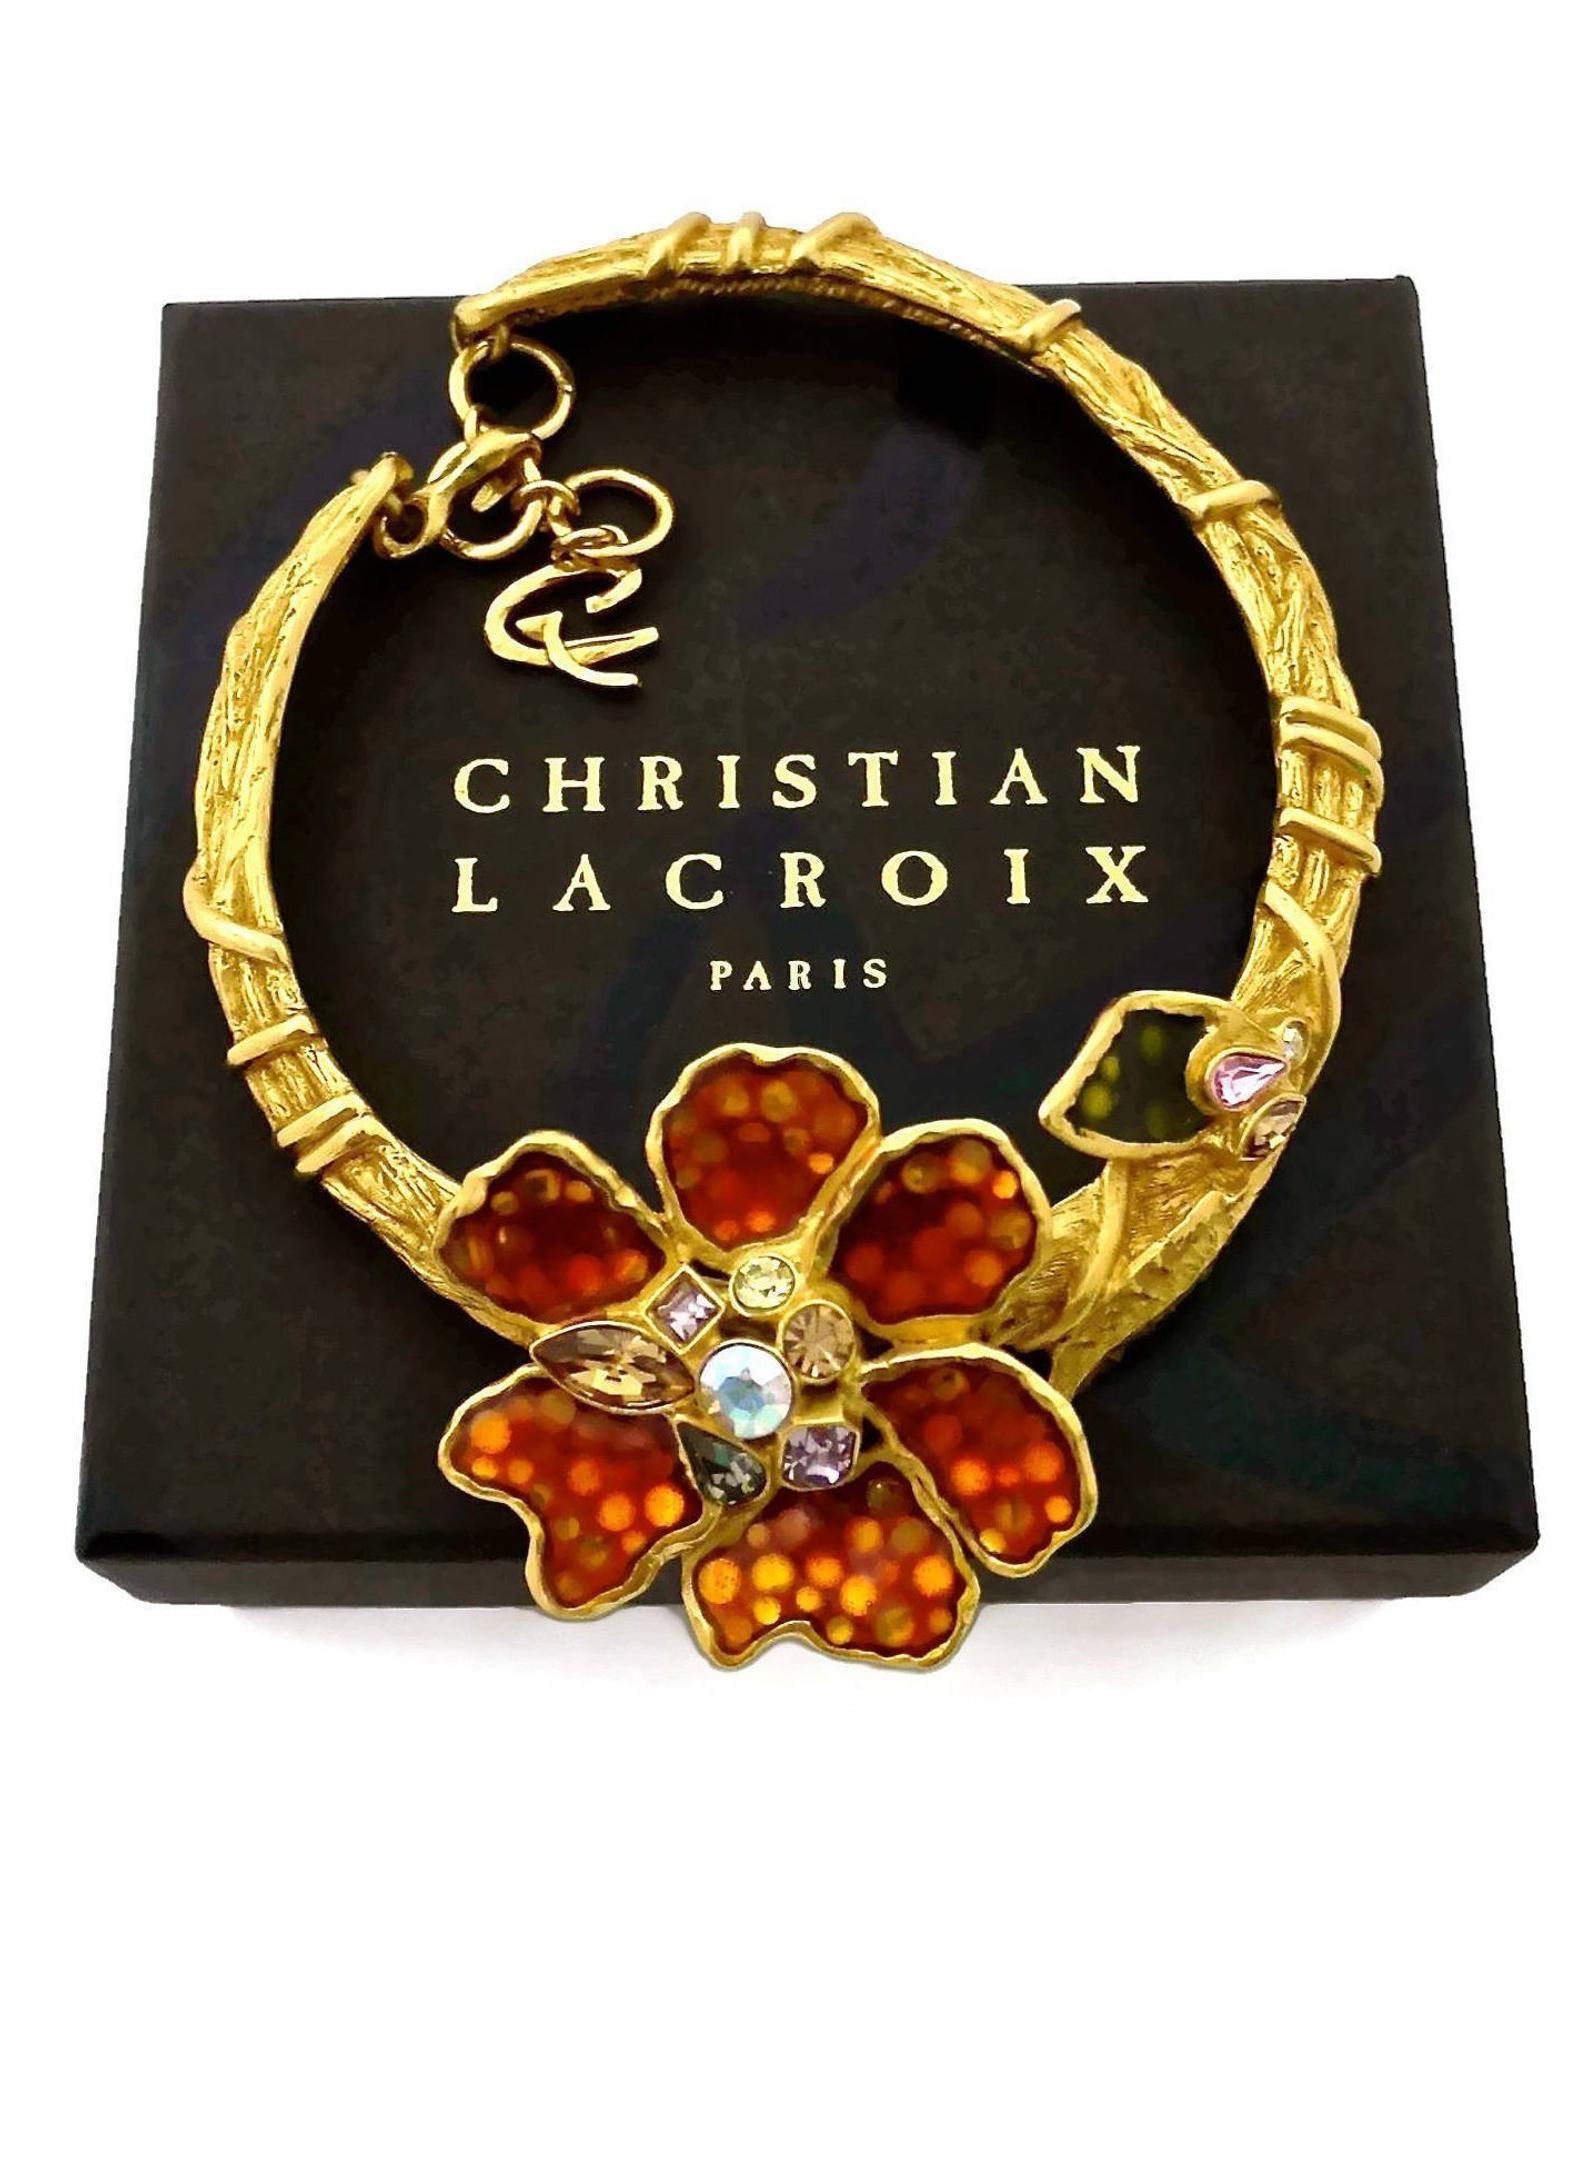 Vintage CHRISTIAN LACROIX Iridescent Flower Rhinestone Enamel Rigid Choker Necklace

Measurements:
Height: 2.28 inches (5.8 cm)
Width: 15.35 inches (39 cm)

Features:
- 100% Authentic CHRISTIAN LACROIX.
- Massive iridescent flowers and leaf with